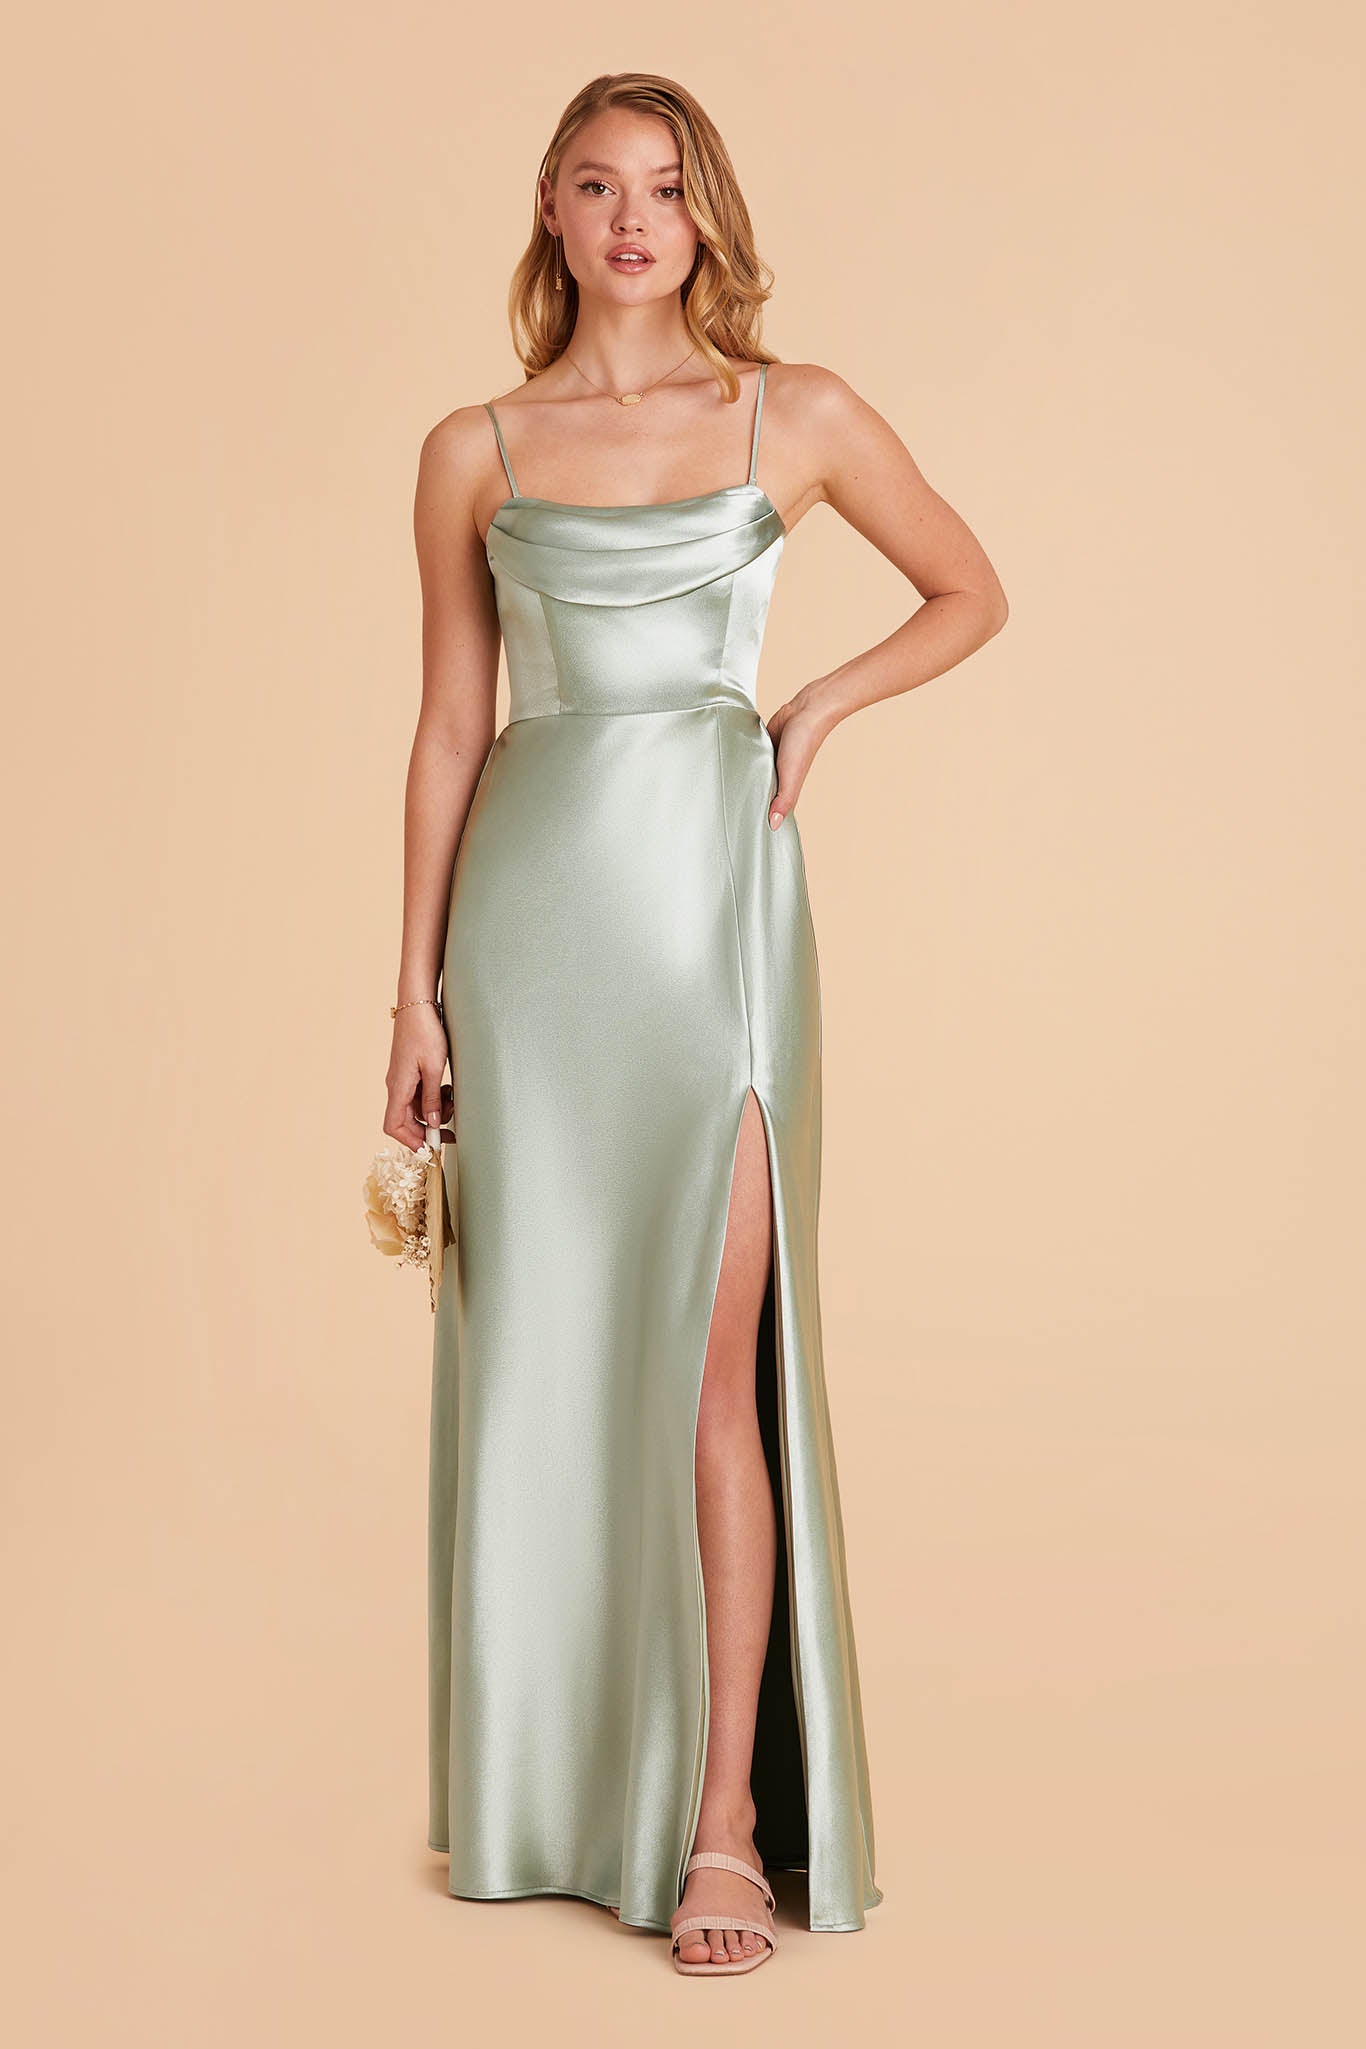 sage green satin bridesmaid dress with pleated cowl neck